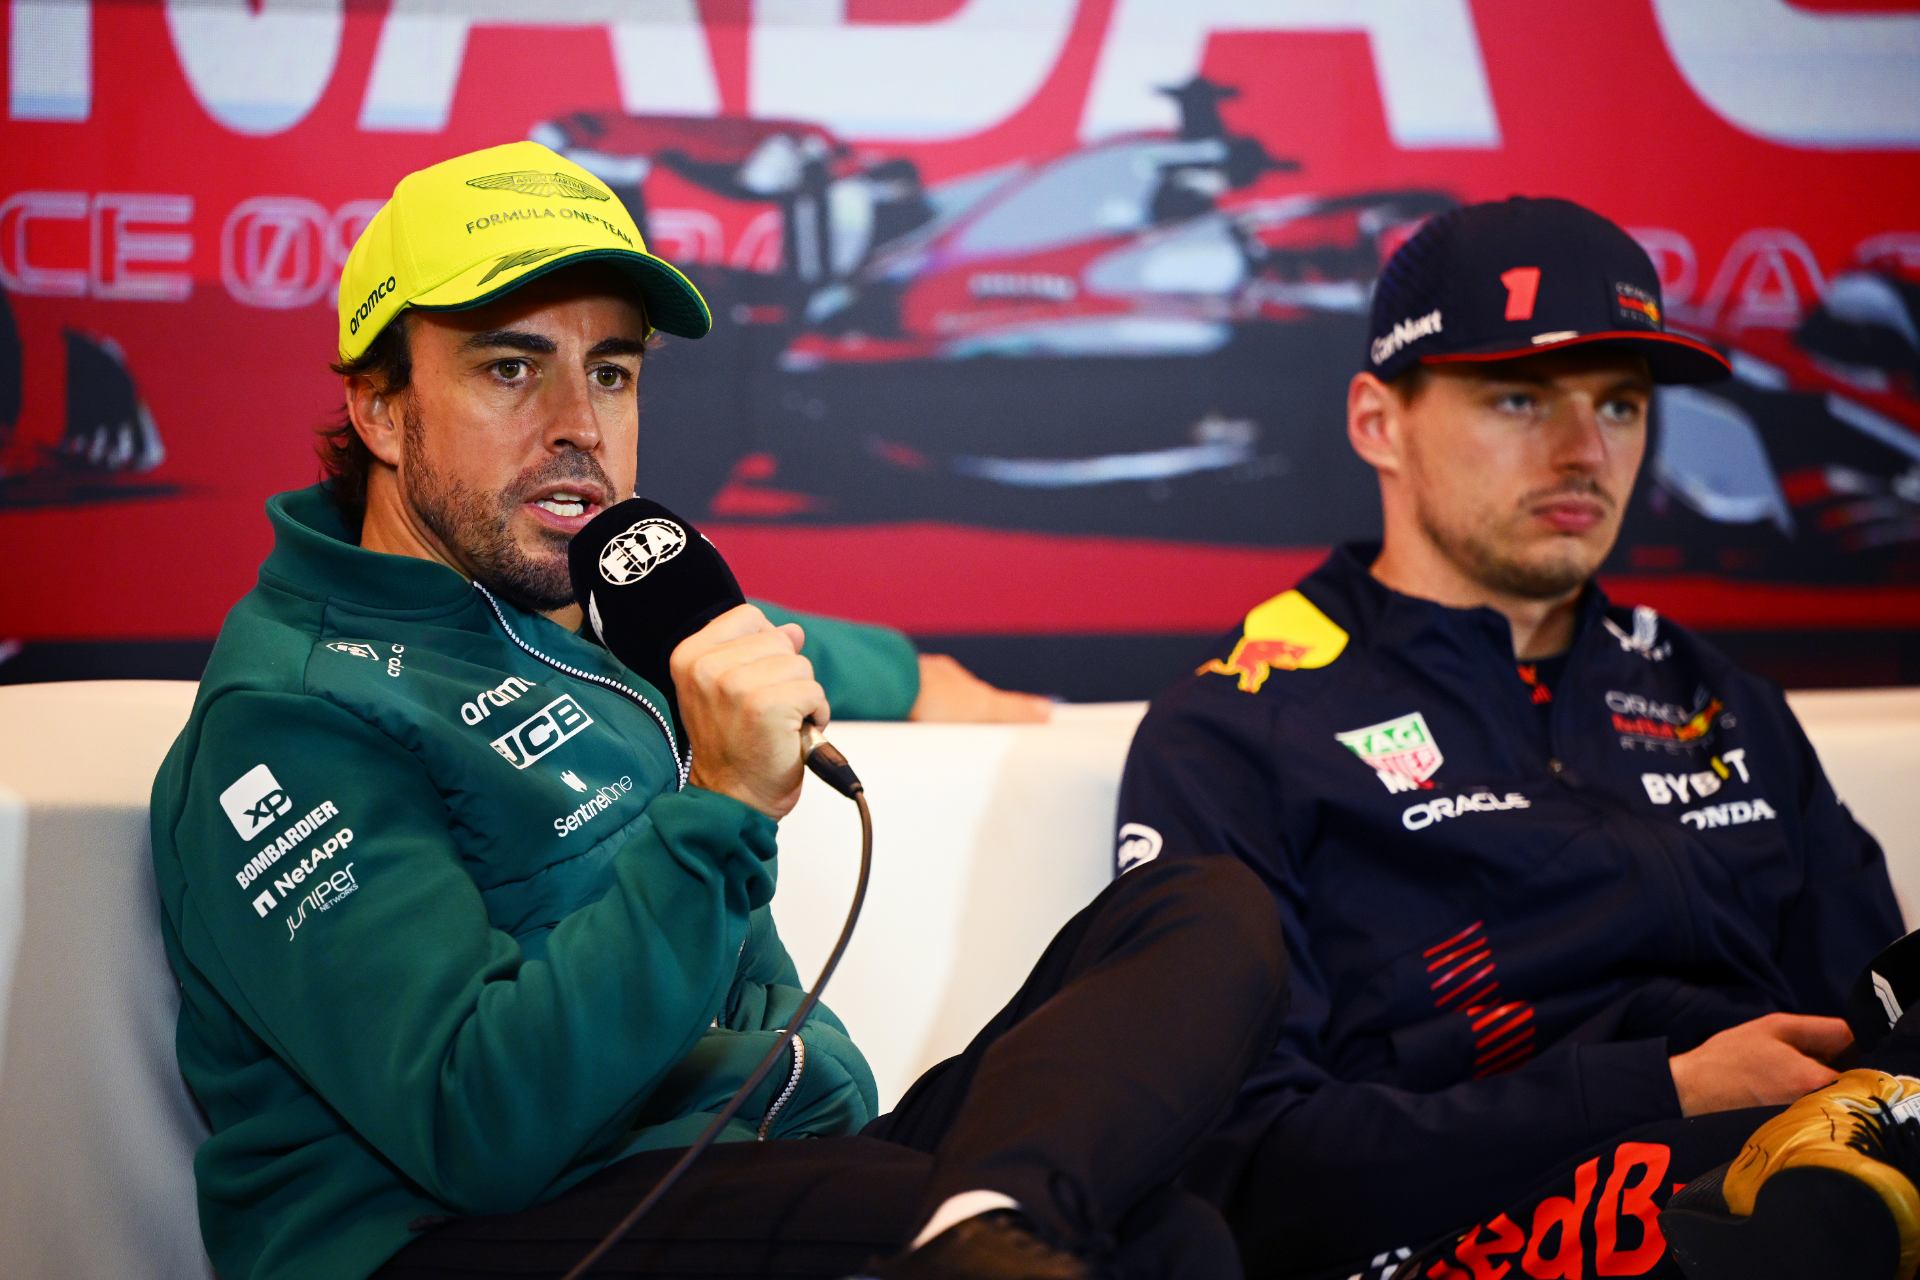 Fernando Alonso talking at a press conference with Max Verstappen in the background